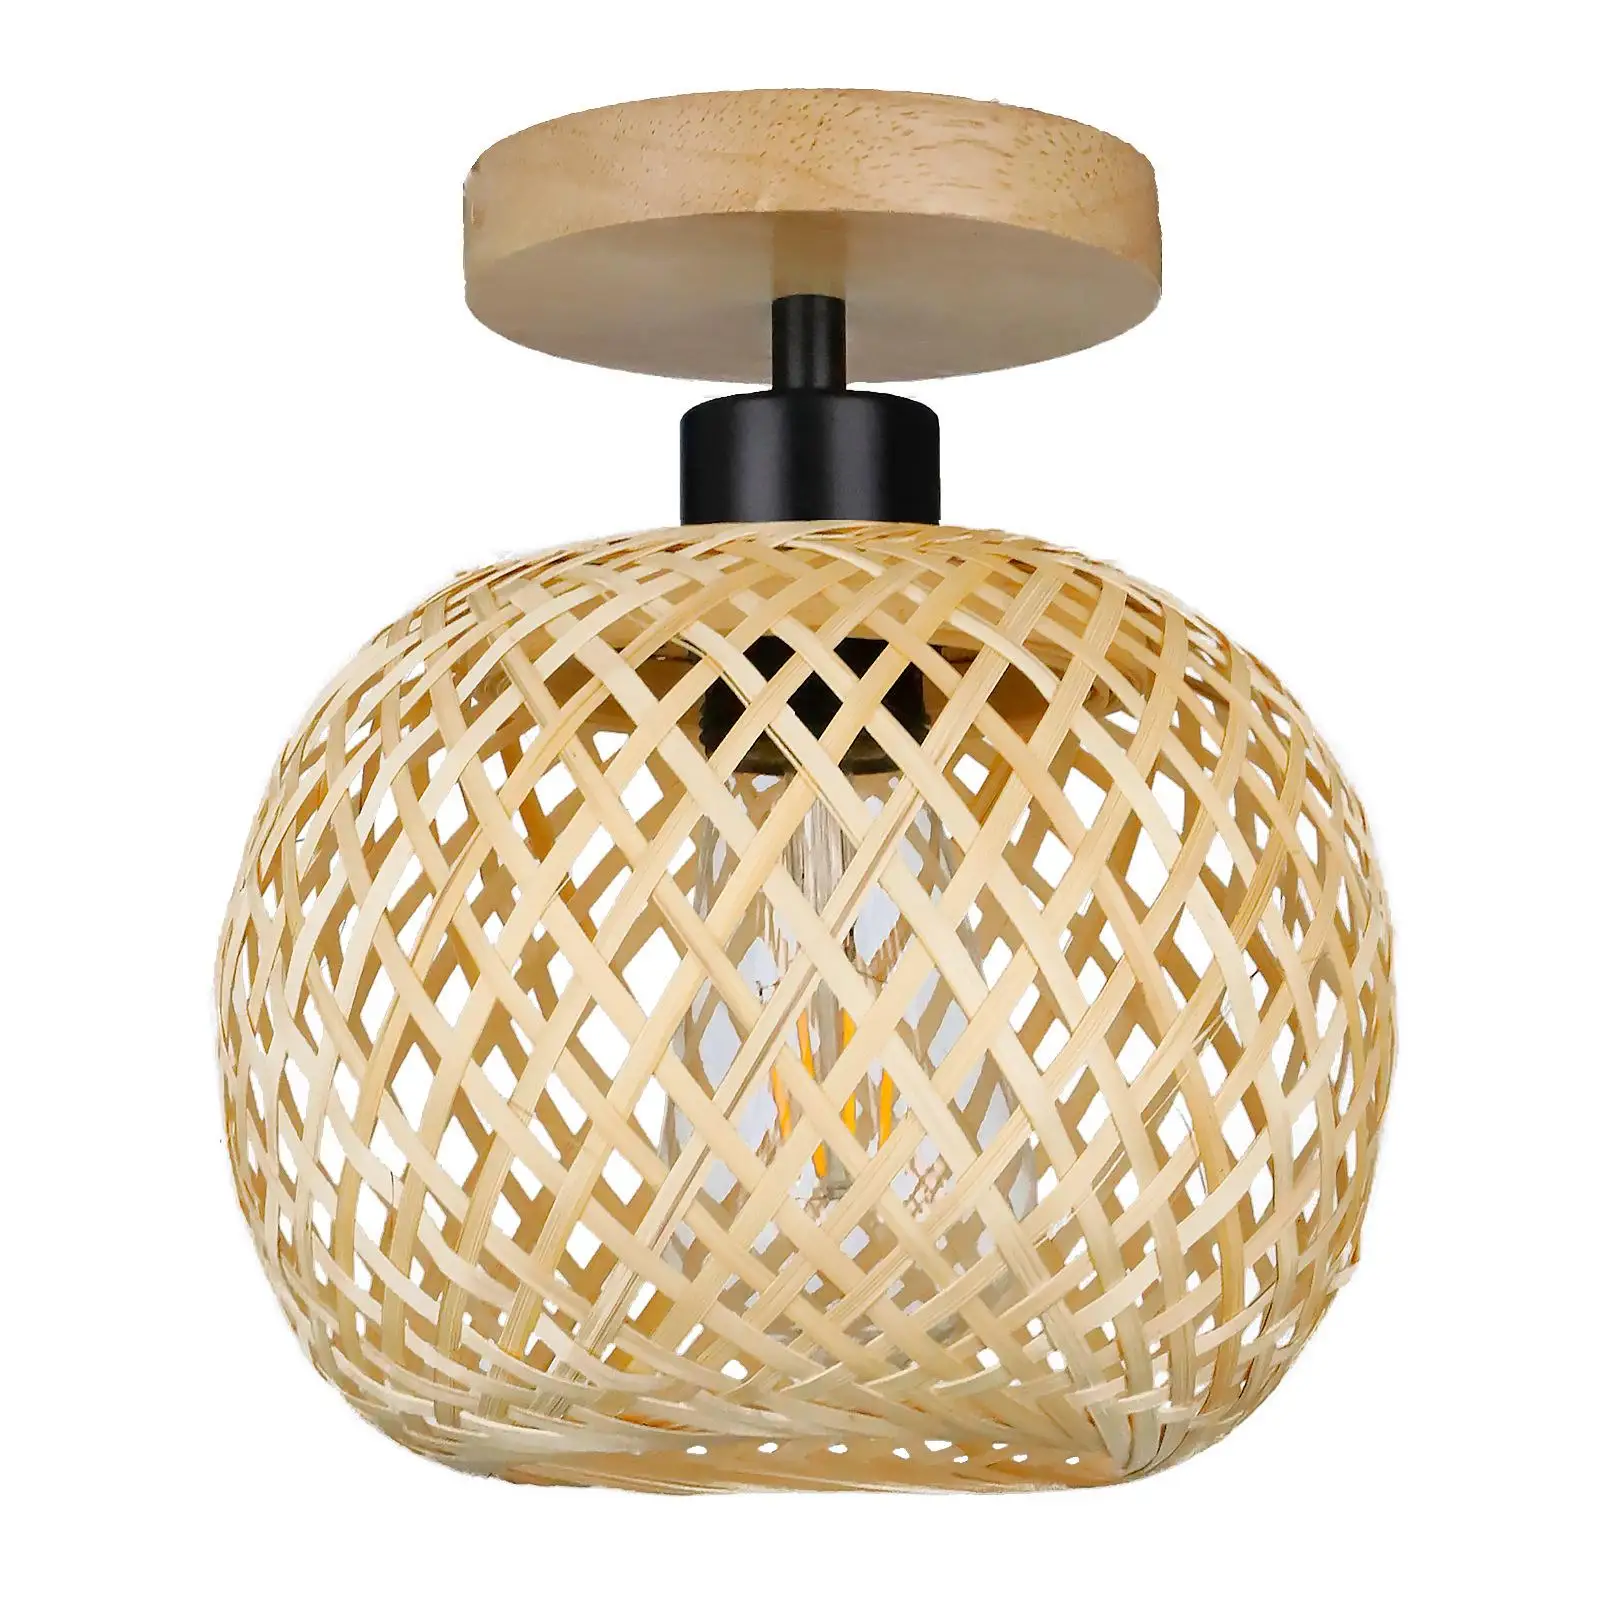 Bamboo Ball Lamp with No Bulb Hand Woven Rattan Chandelier E26 Kitchen Flush Mount Living Room Rustic Style Bambbo Pendant Light